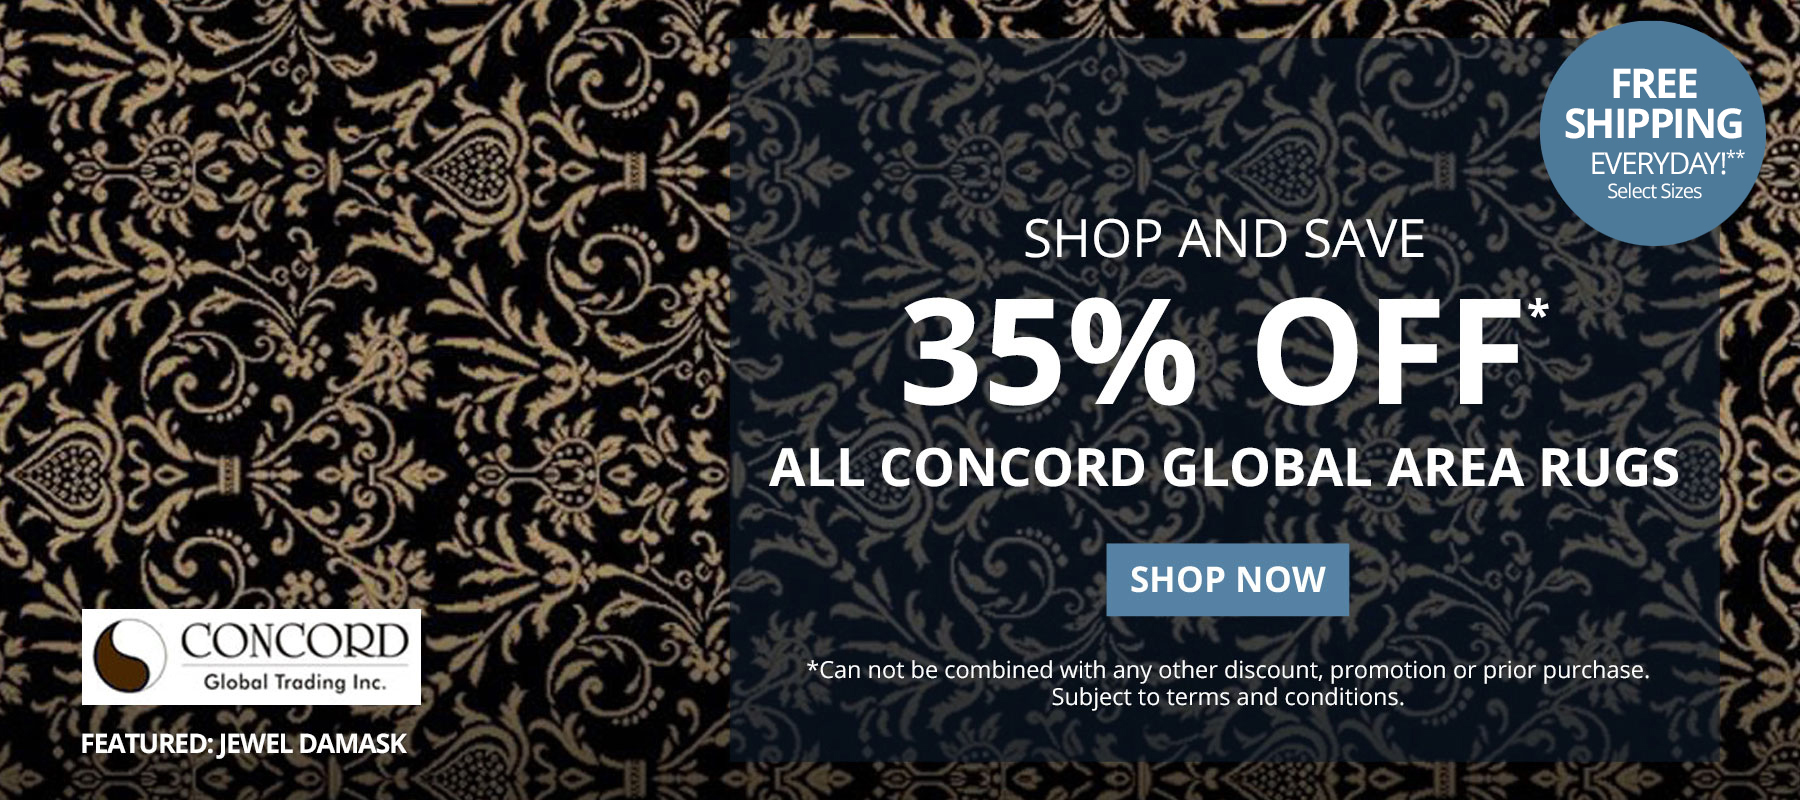 Shop and Save 35% Off* All Concord Global Area Rugs. Free Shipping Everyday!** Select Sizes. *Can not be combined with any other discount, promotion or prior purchase. Subject to terms and conditions. Shop Now.